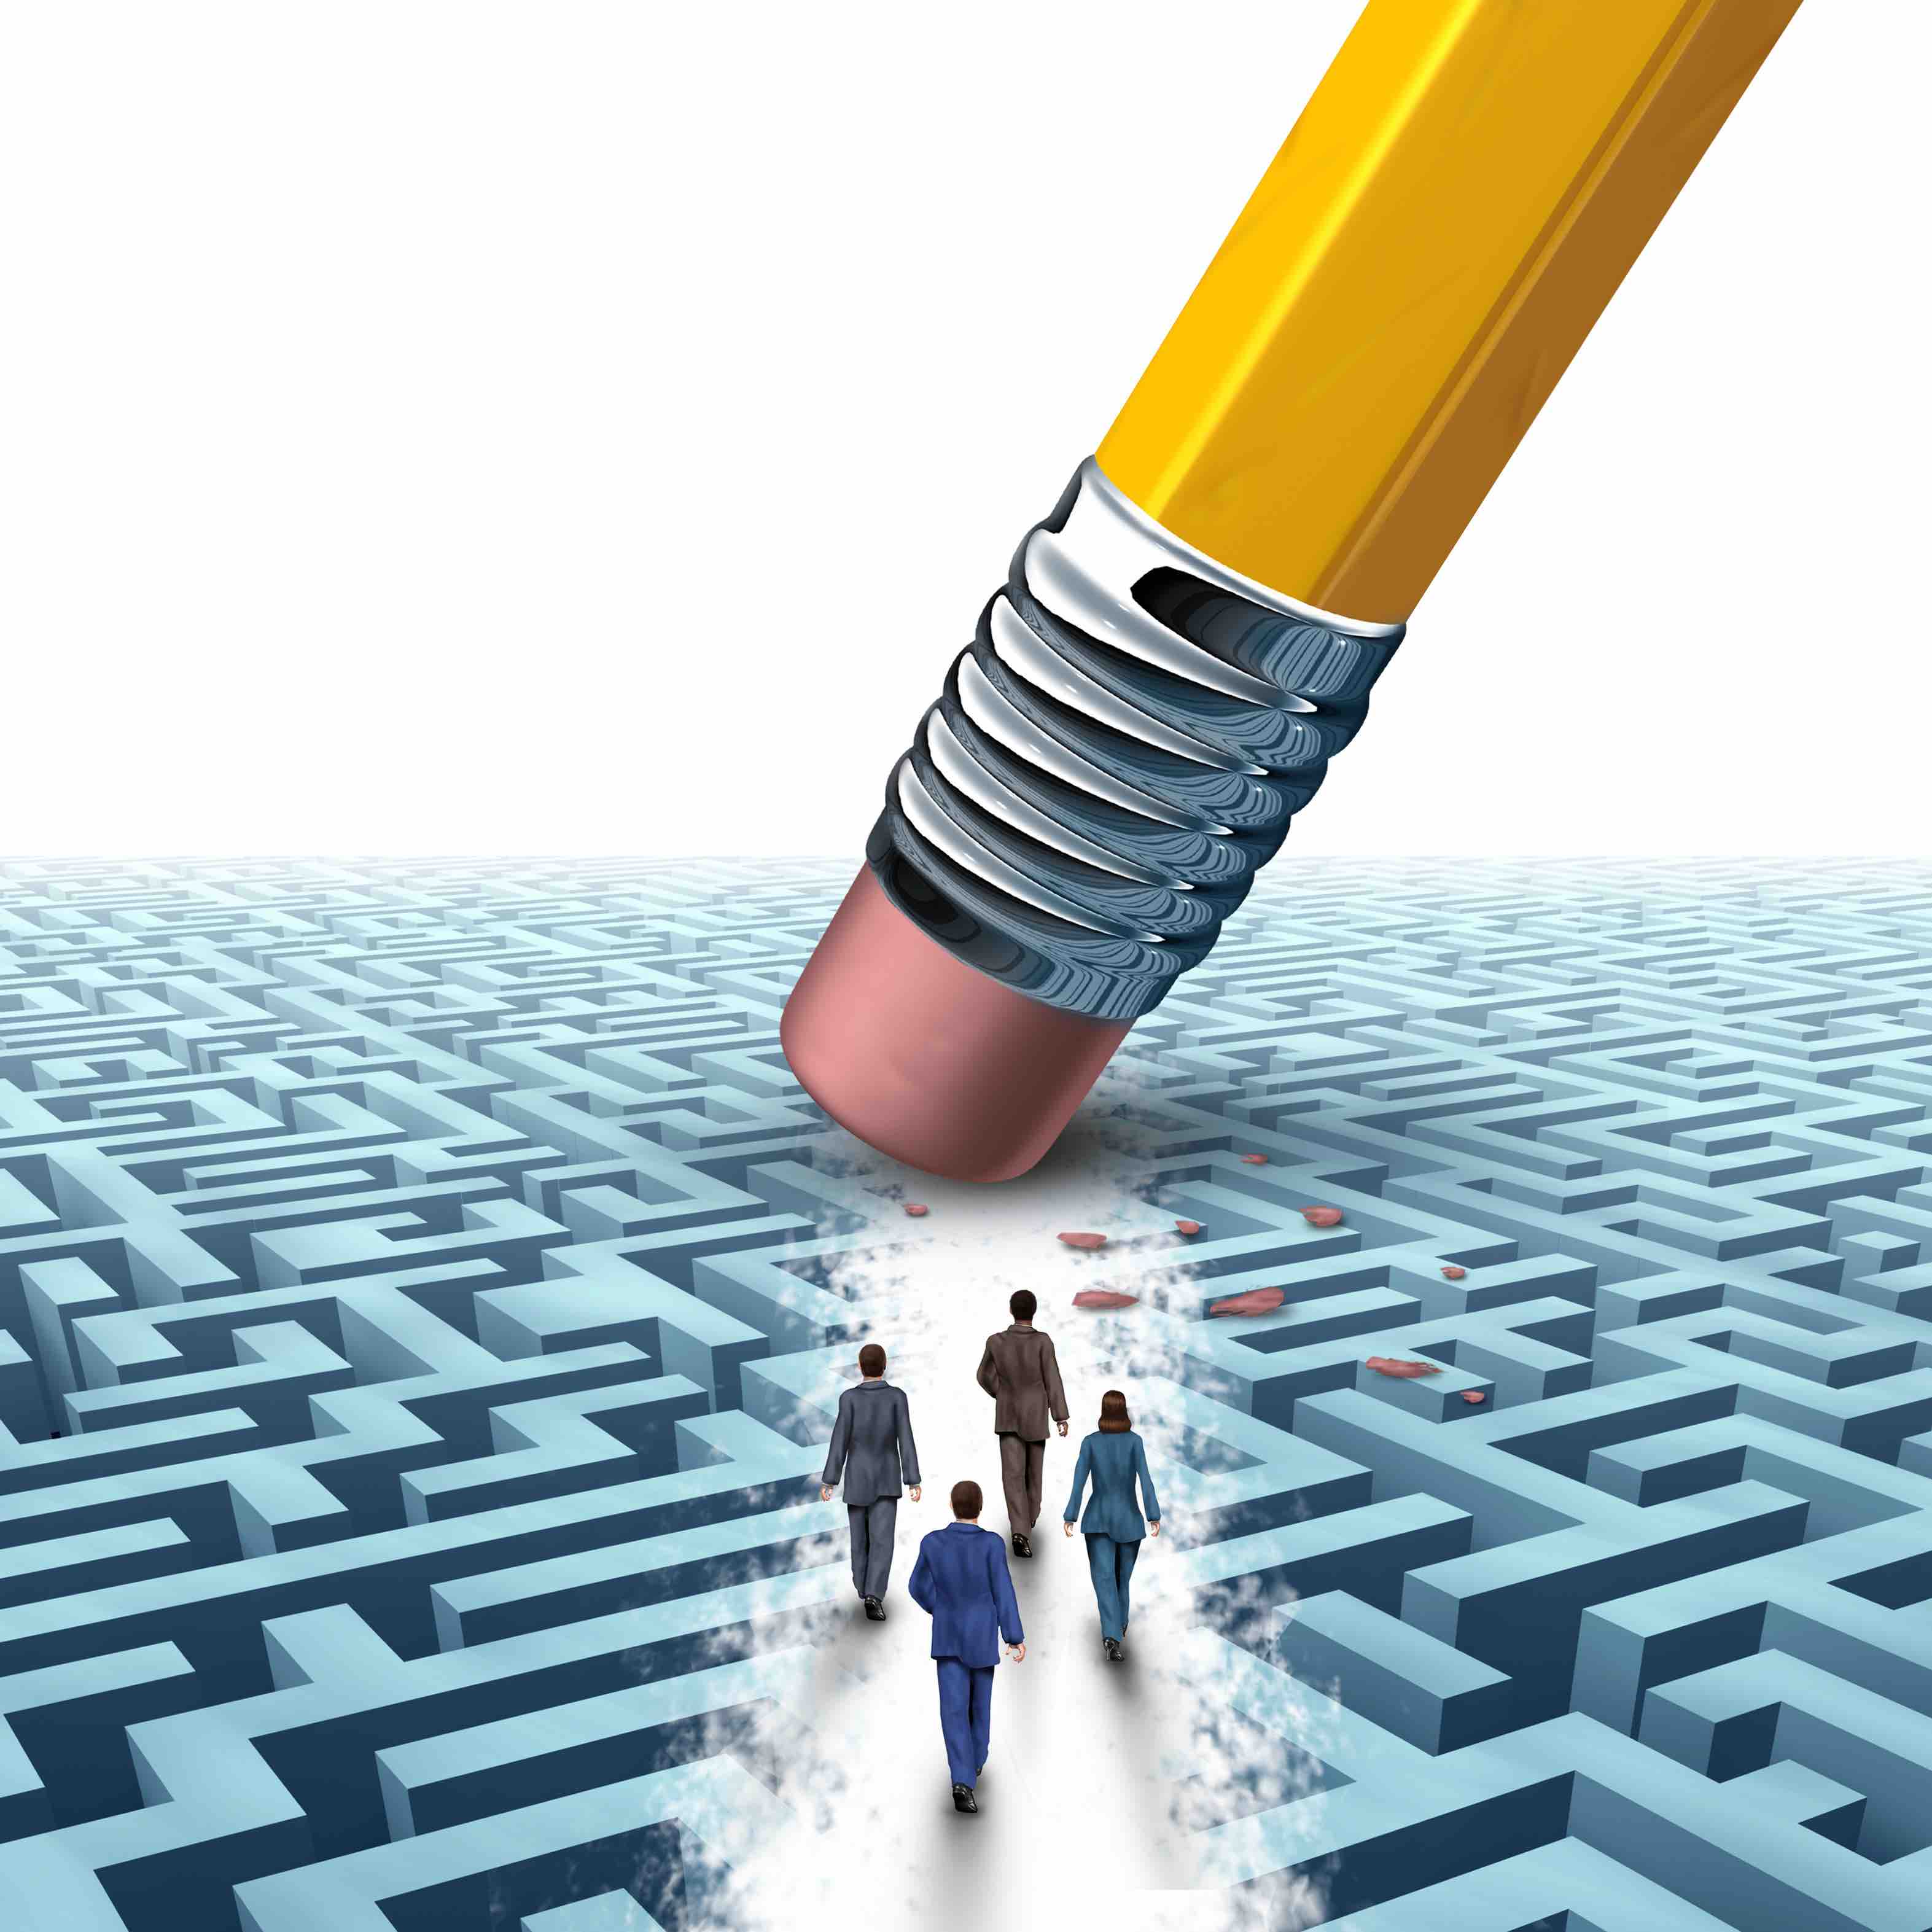 Team business management as several businesspeople walking in a clear path on a maze or labyrinth as an eraser from a pencil creating a clear path to a successful company solution as a motivation metaphor.